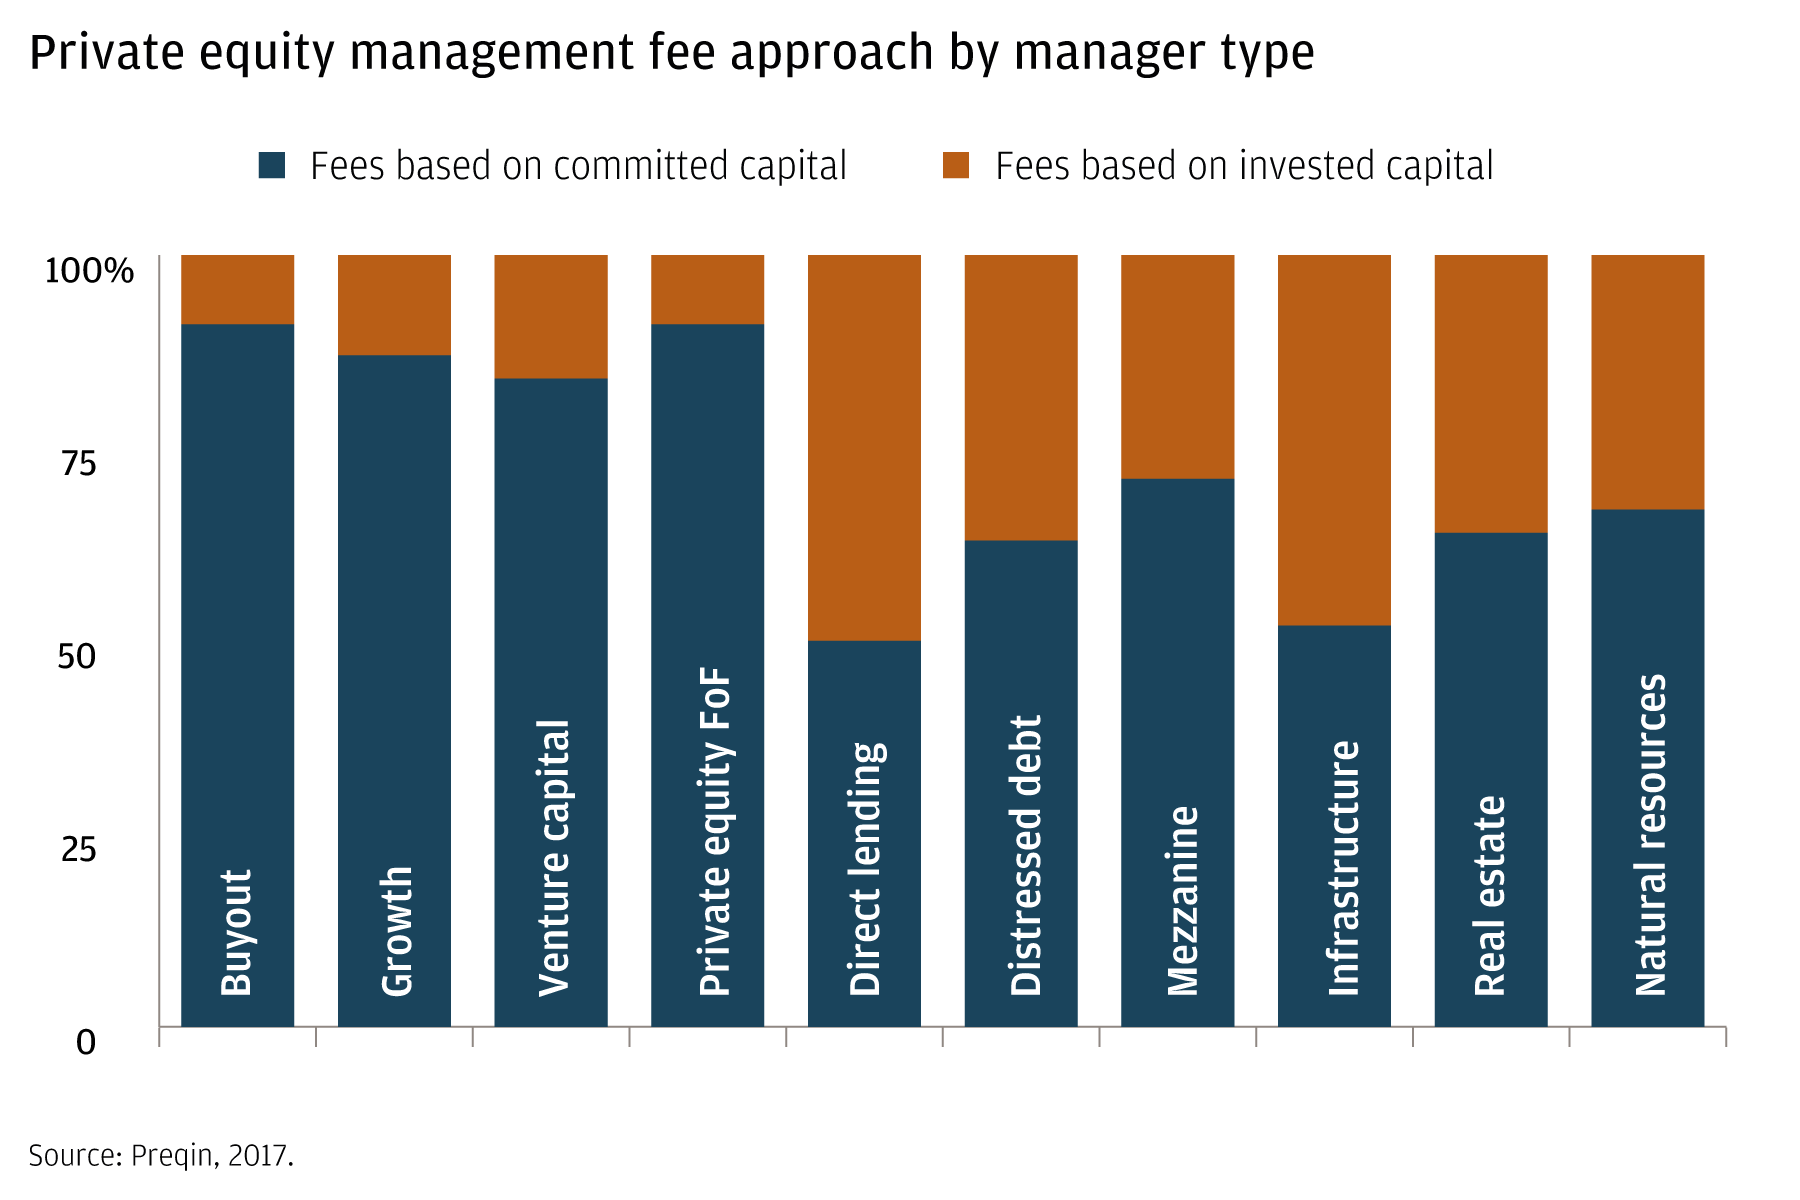 This bar chart shows how different manager types set their fee ratios between fees based on invested capital and fees based on committed capital